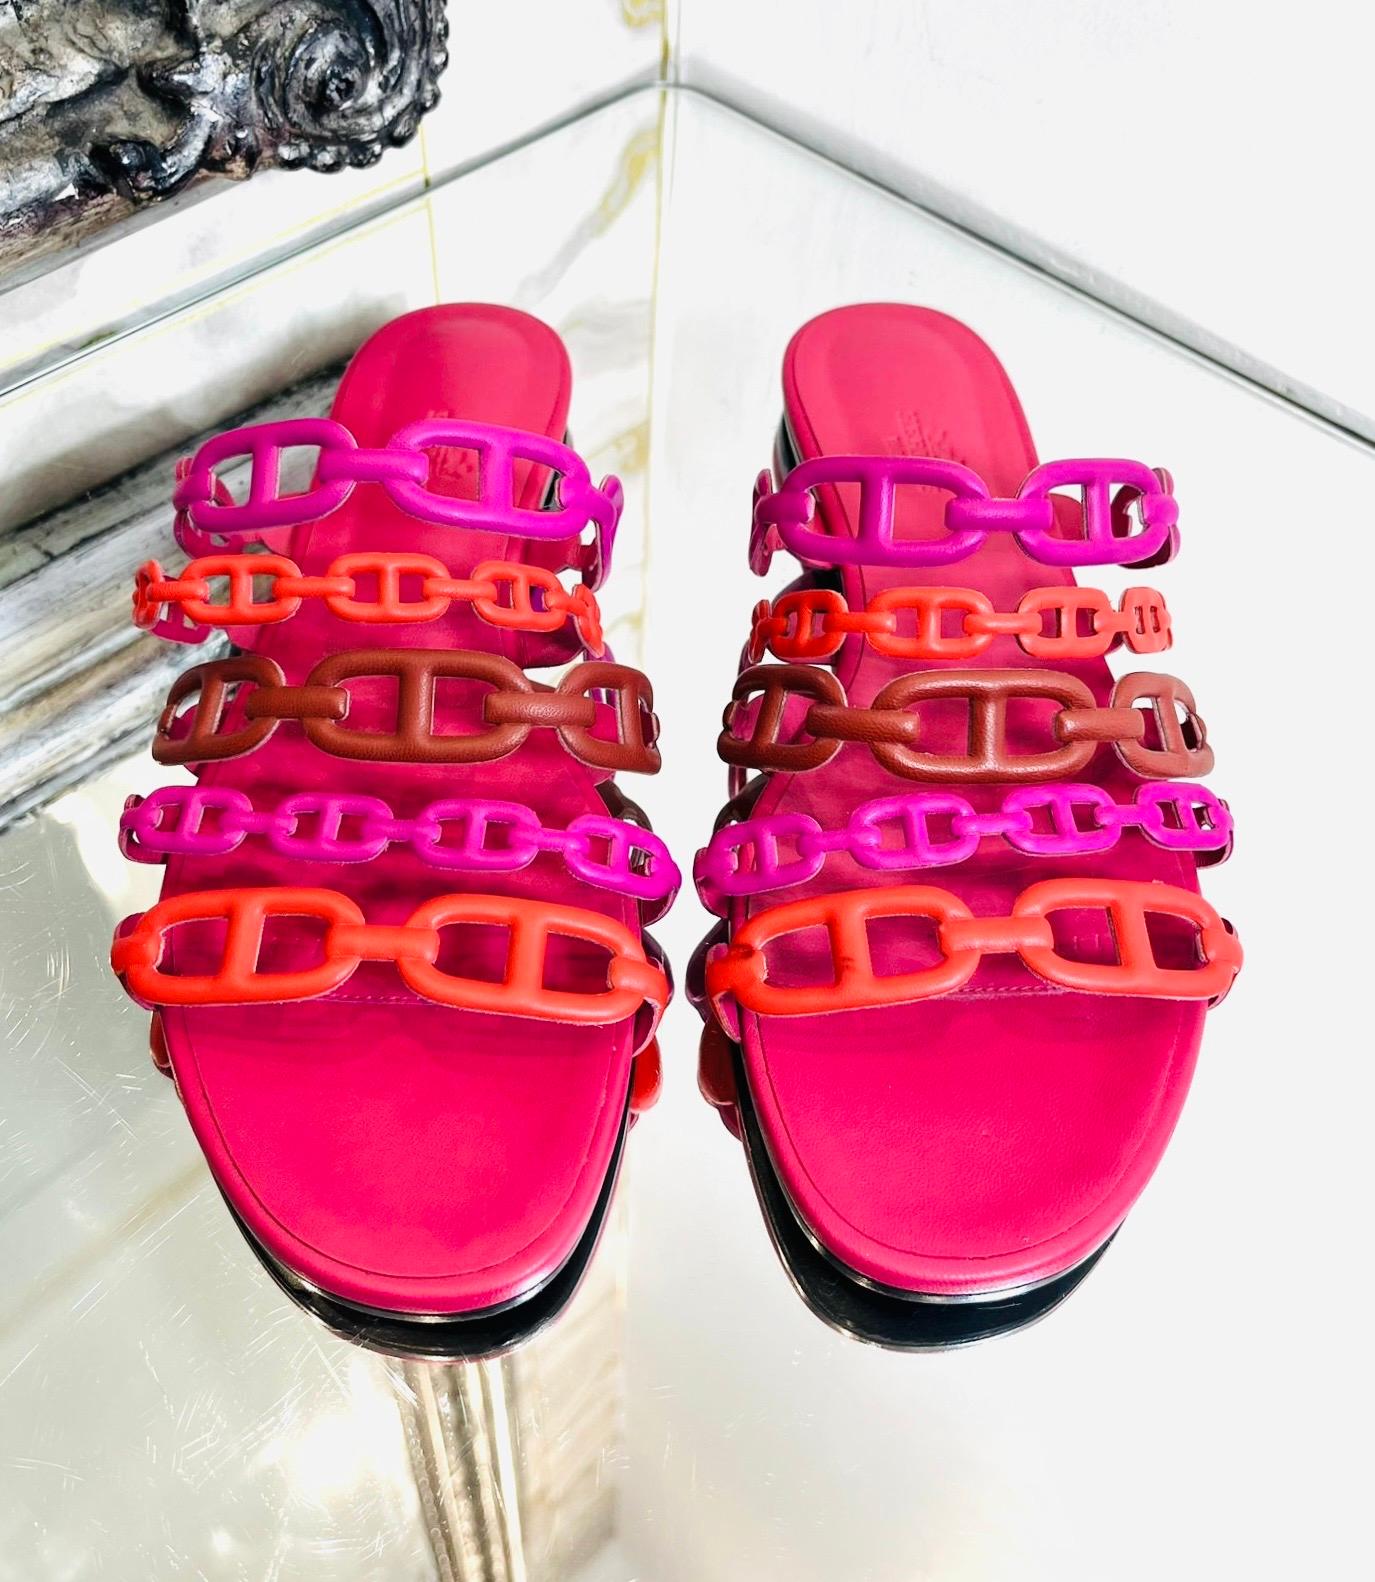 Hermes Leather Thalassa Sandals

Pink sandals designed with 'Chaine d'Ancre' motif and detailed with strappy silhouette in the shades of red and pink.

Featuring goatskin insoles and lining with flat leather soles. Rrp £610

Size – 40

Condition –